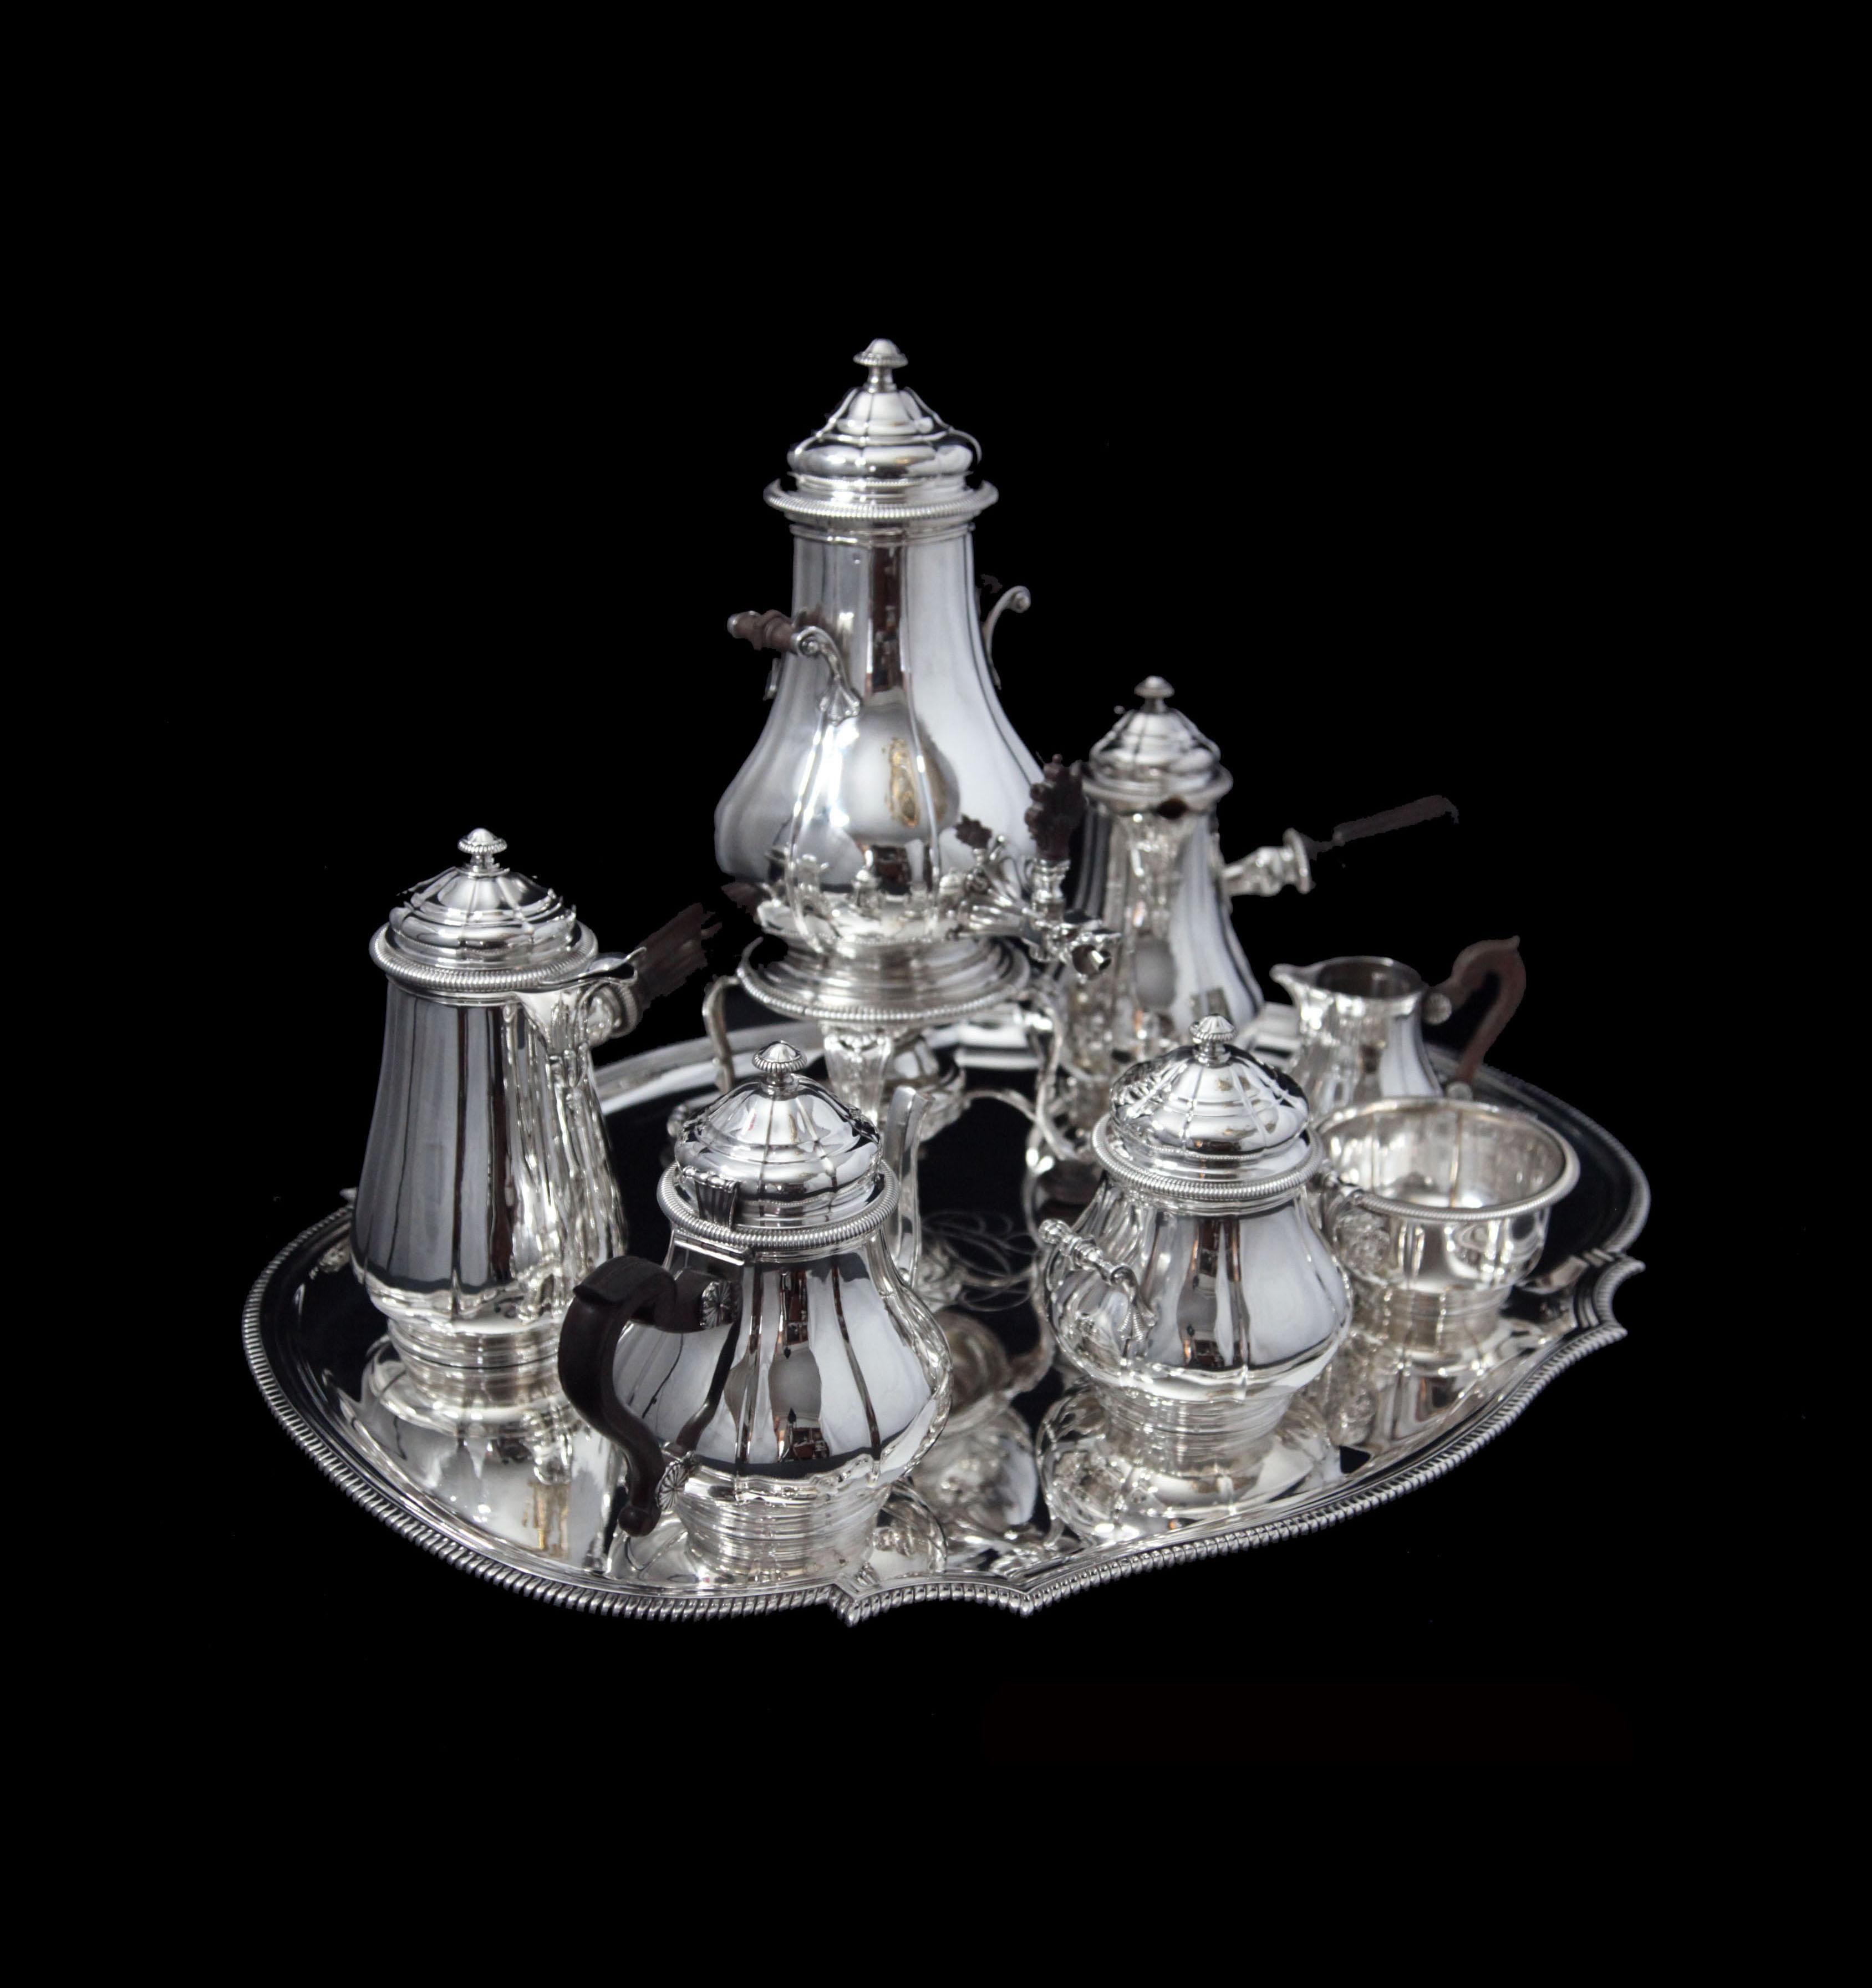 Direct from Paris, A Magnificent 8-piece Sterling Silver Tea Set by one of France's Premier French Silversmith 